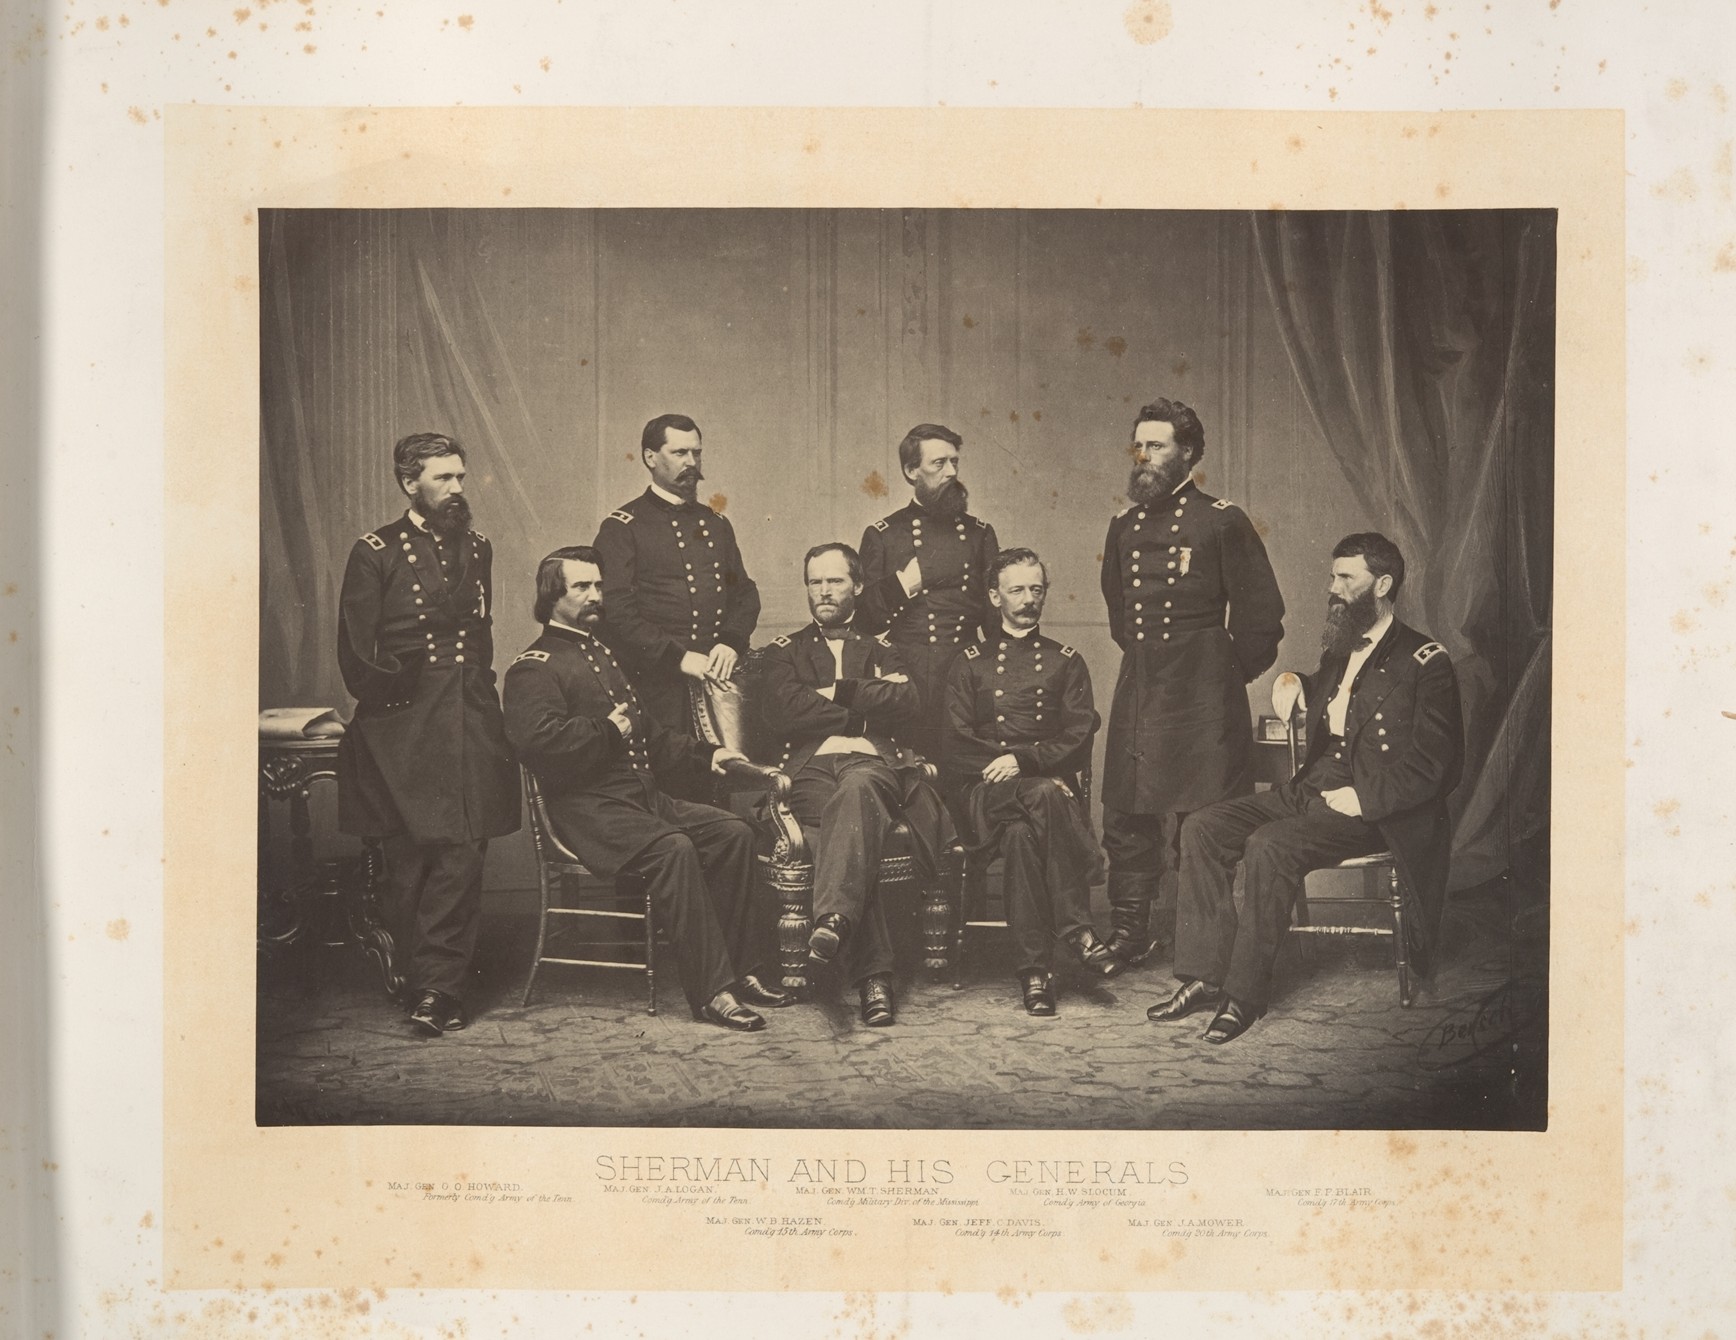 Lincoln’s generals: Sherman and Grant in their memoirs